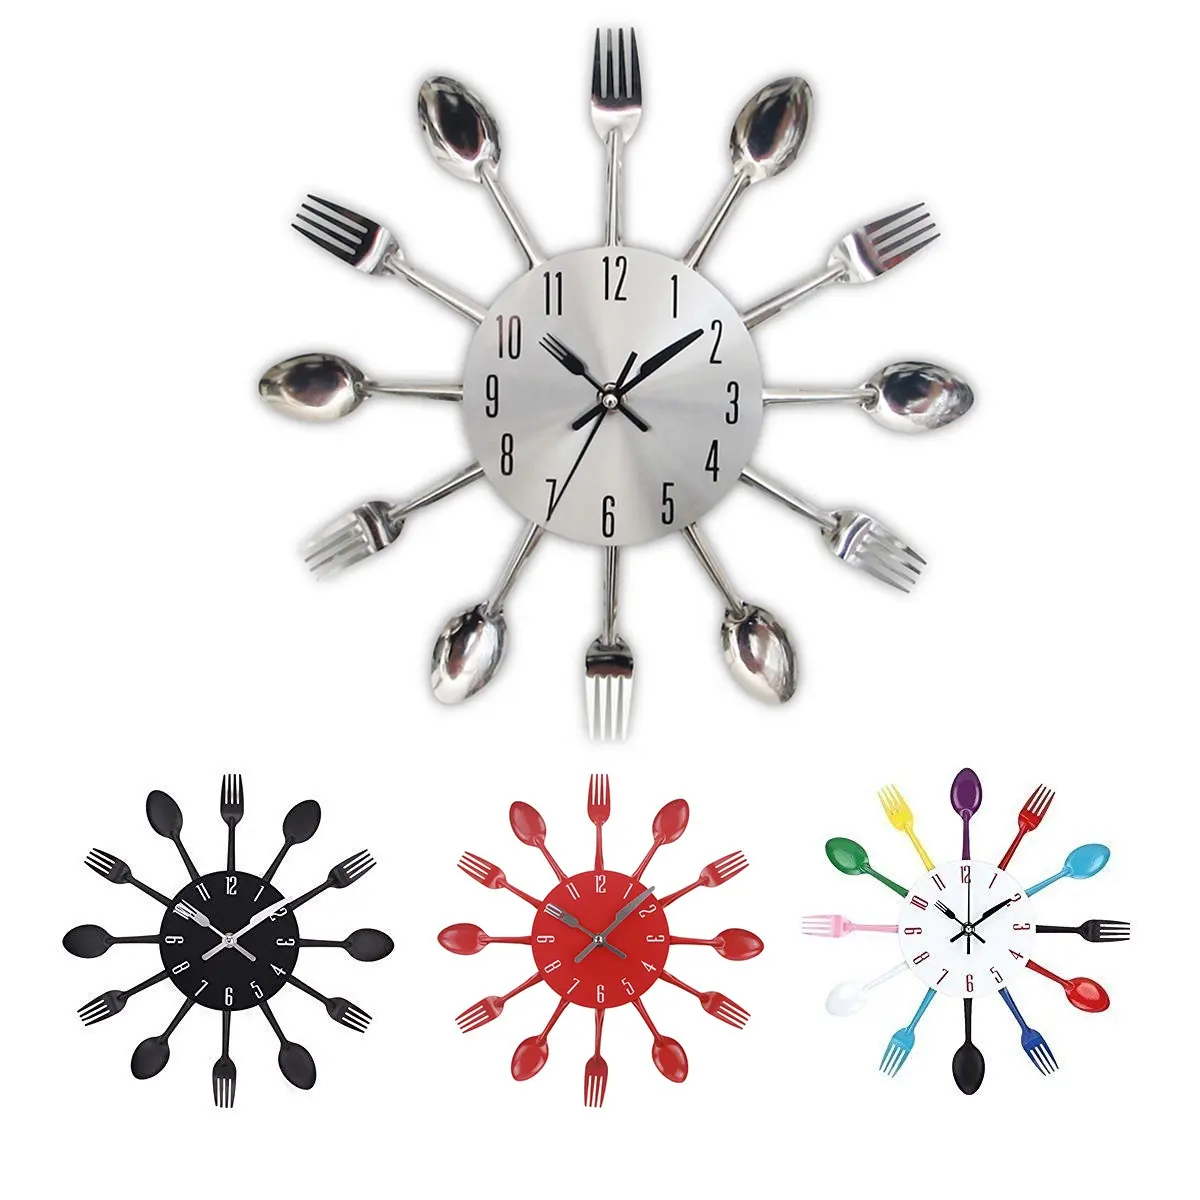 Fancy Home Decor 14" Kitchen Cutlery Wall Clock with Forks and Spoons, 3D Removable Modern Creative Wall Clock Nice Gifts